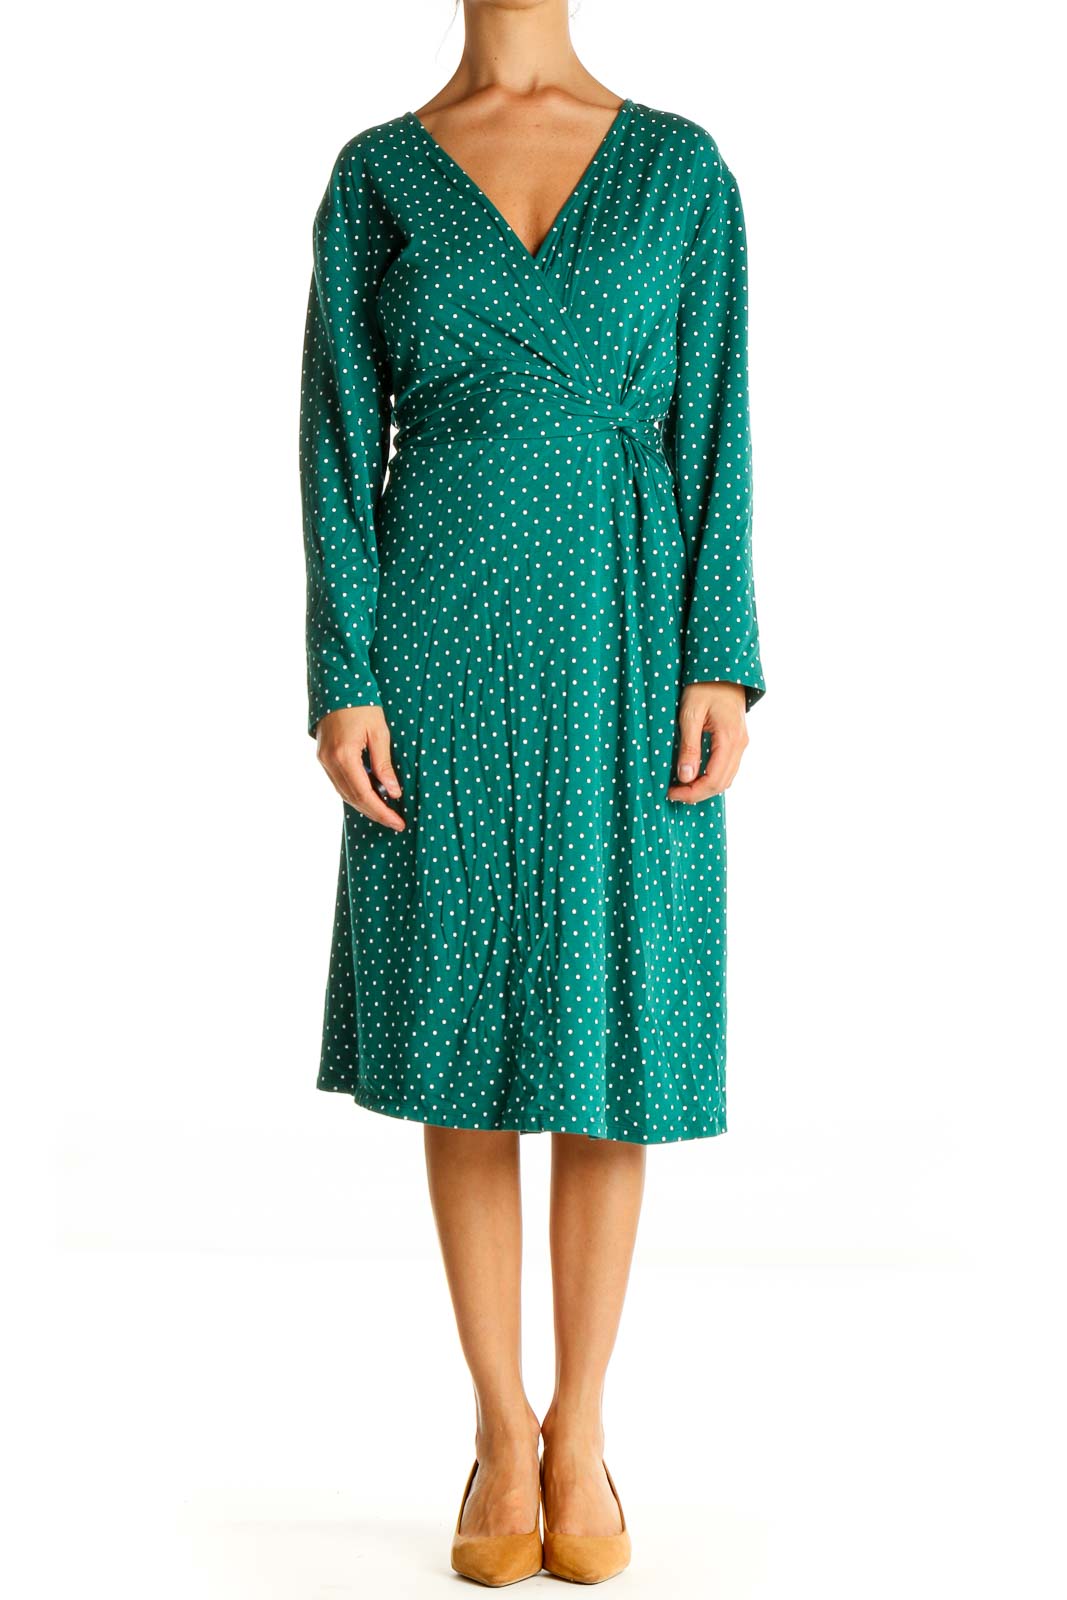 Green Polka Dot Day Fit & Flare Dress Front